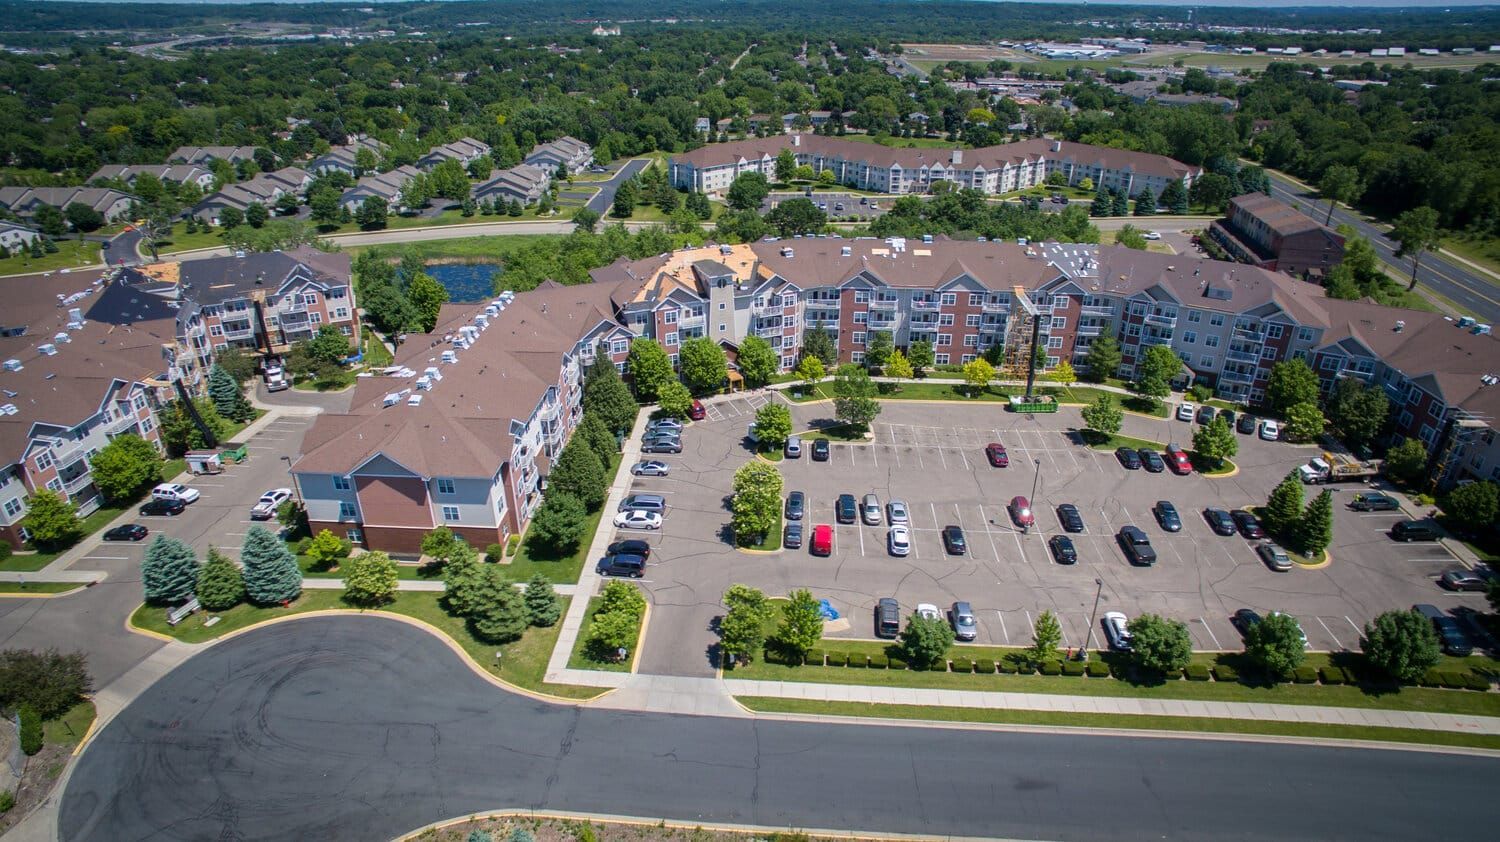 Apartment Complex with Wide Parking Area | White Bear Lake, MN | Bruggeman Exteriors